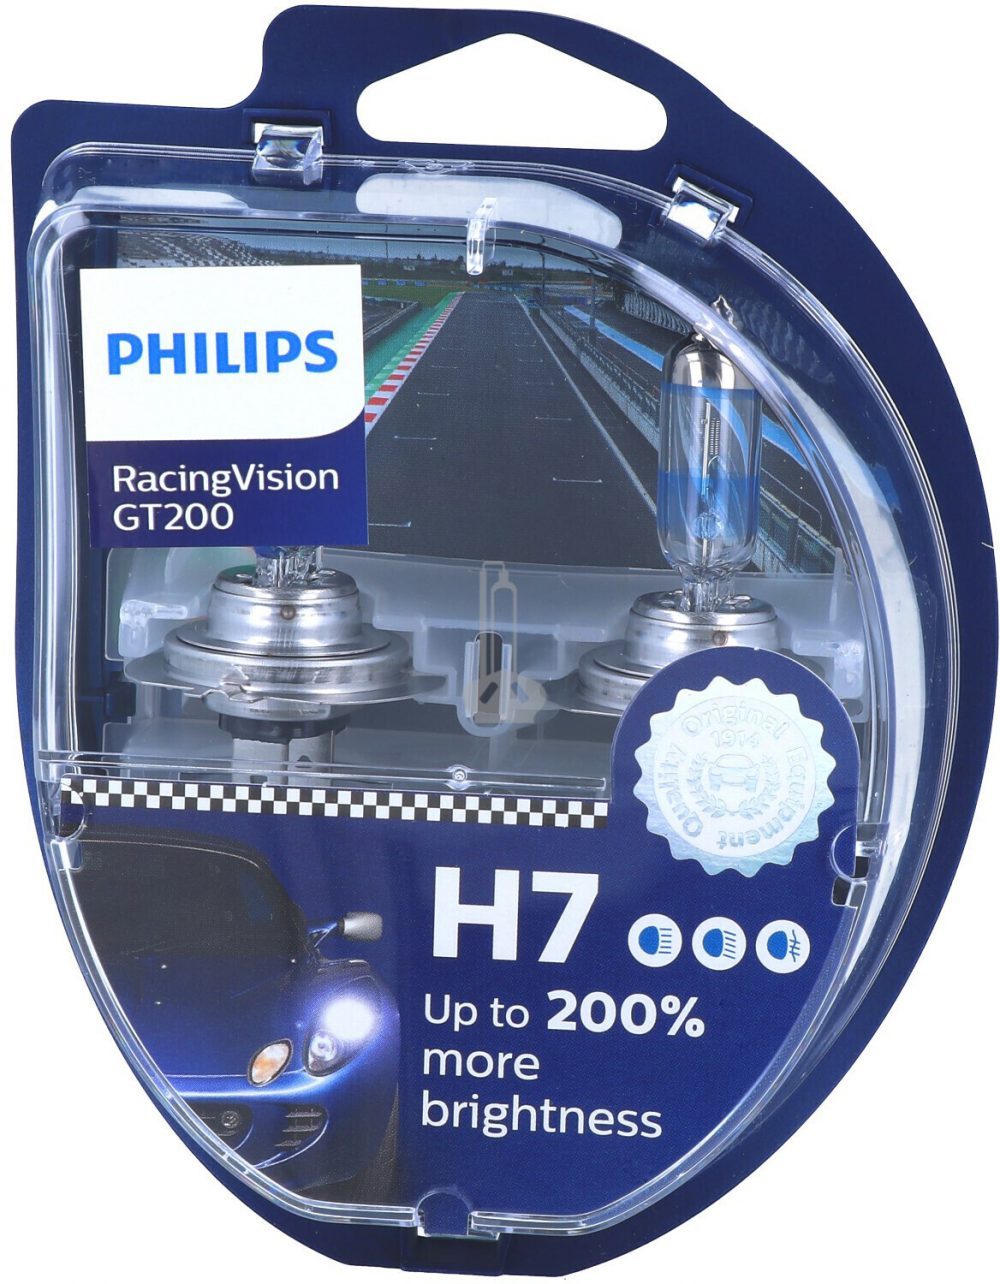 Coppia lampade h7 Racing Vision gt200 + 200% Philips